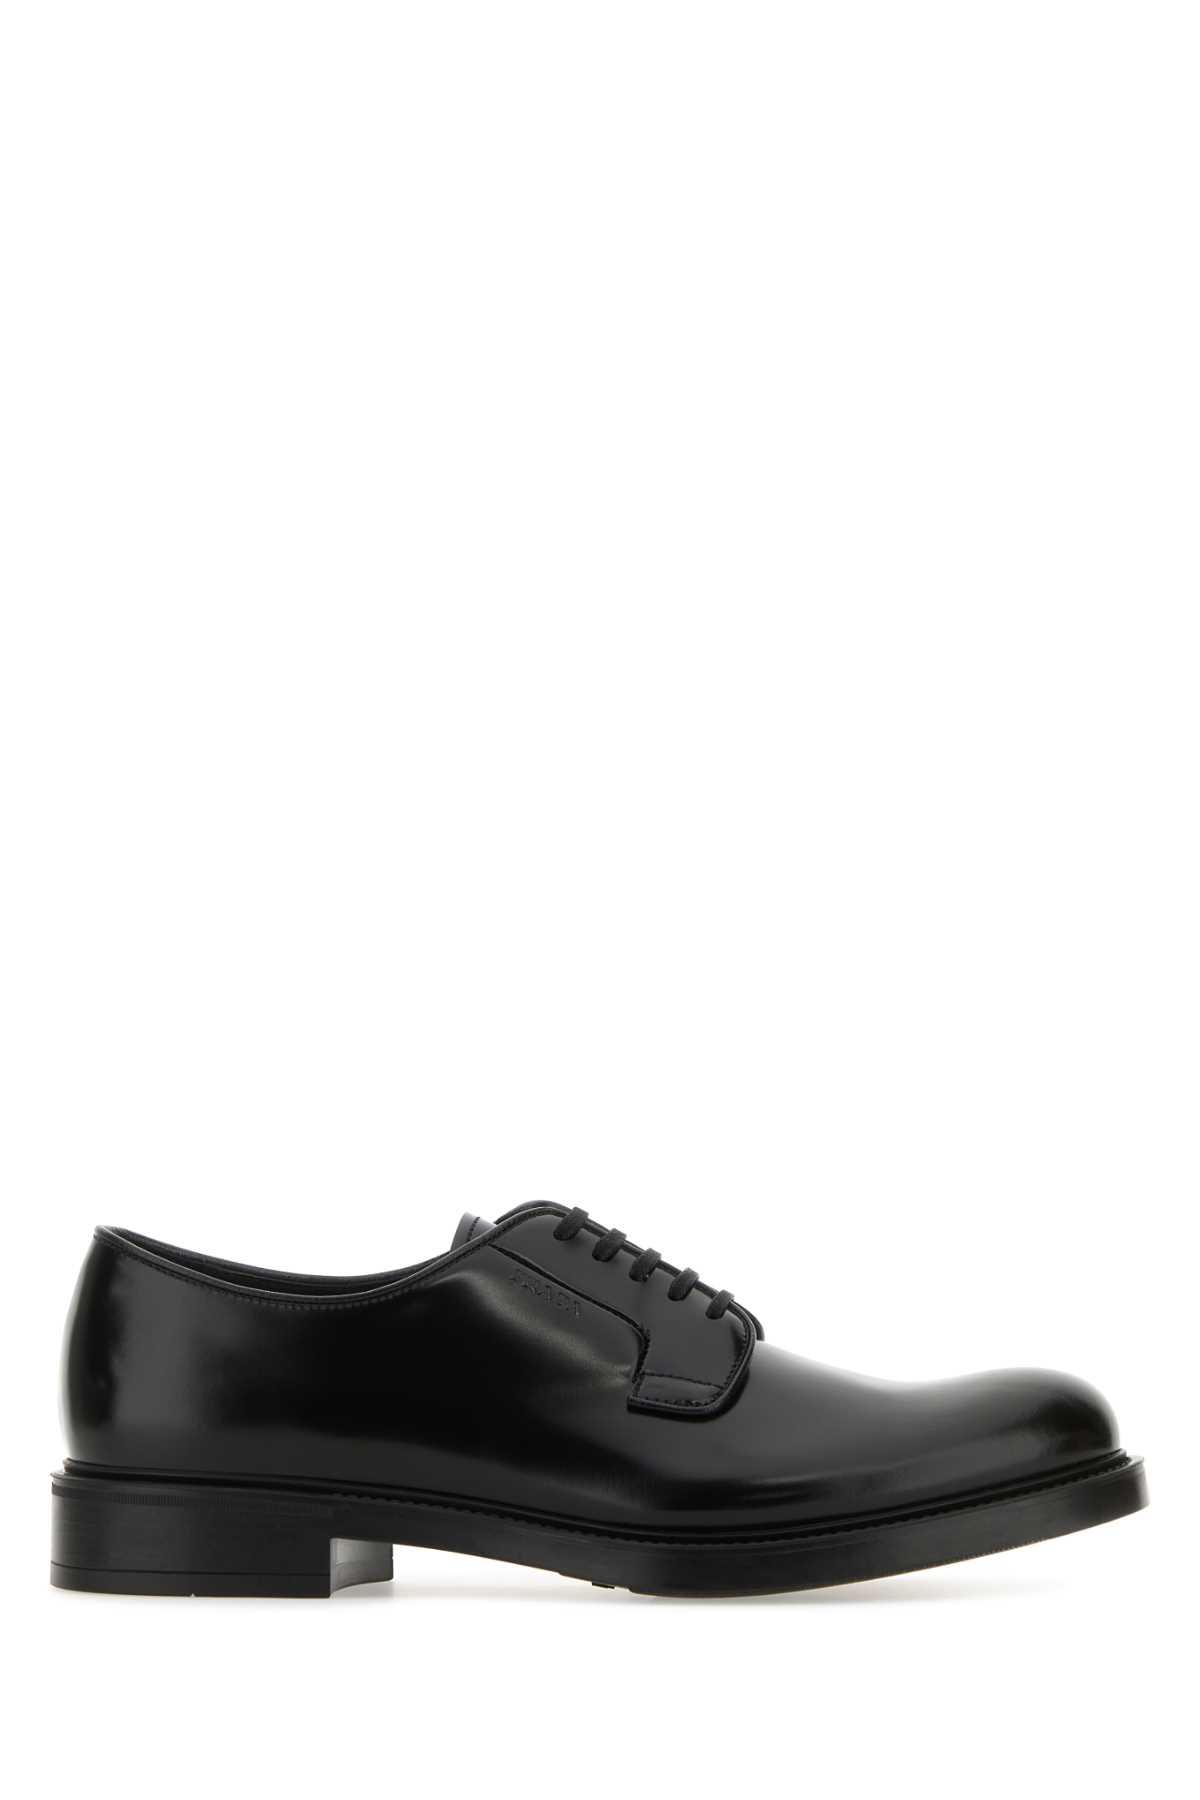 Shop Prada Black Leather Lace-up Shoes In F0002